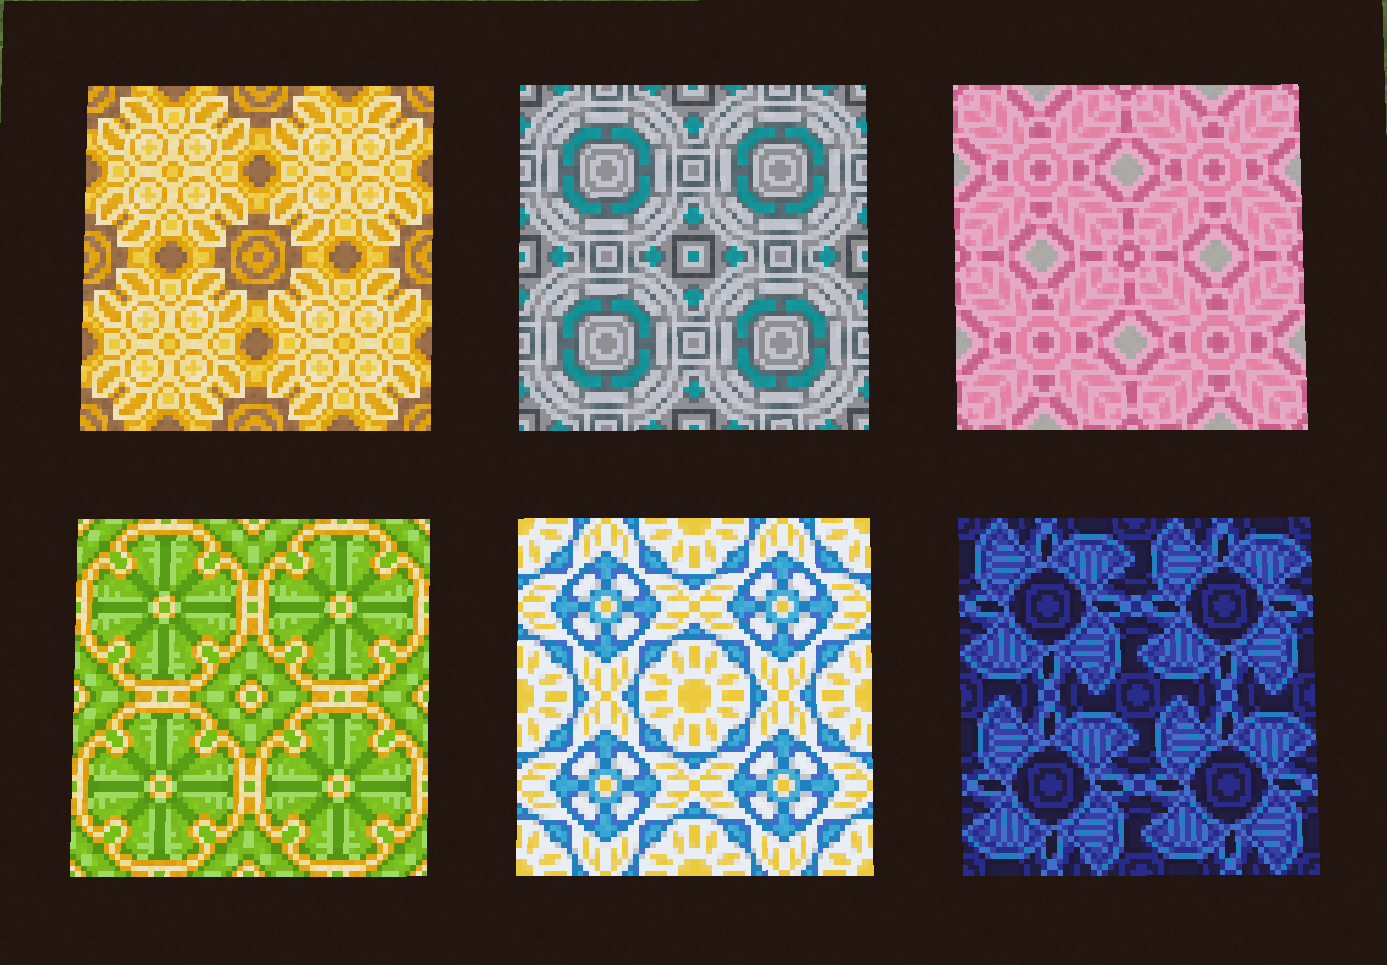 Images formed by placing glazed terracotta together